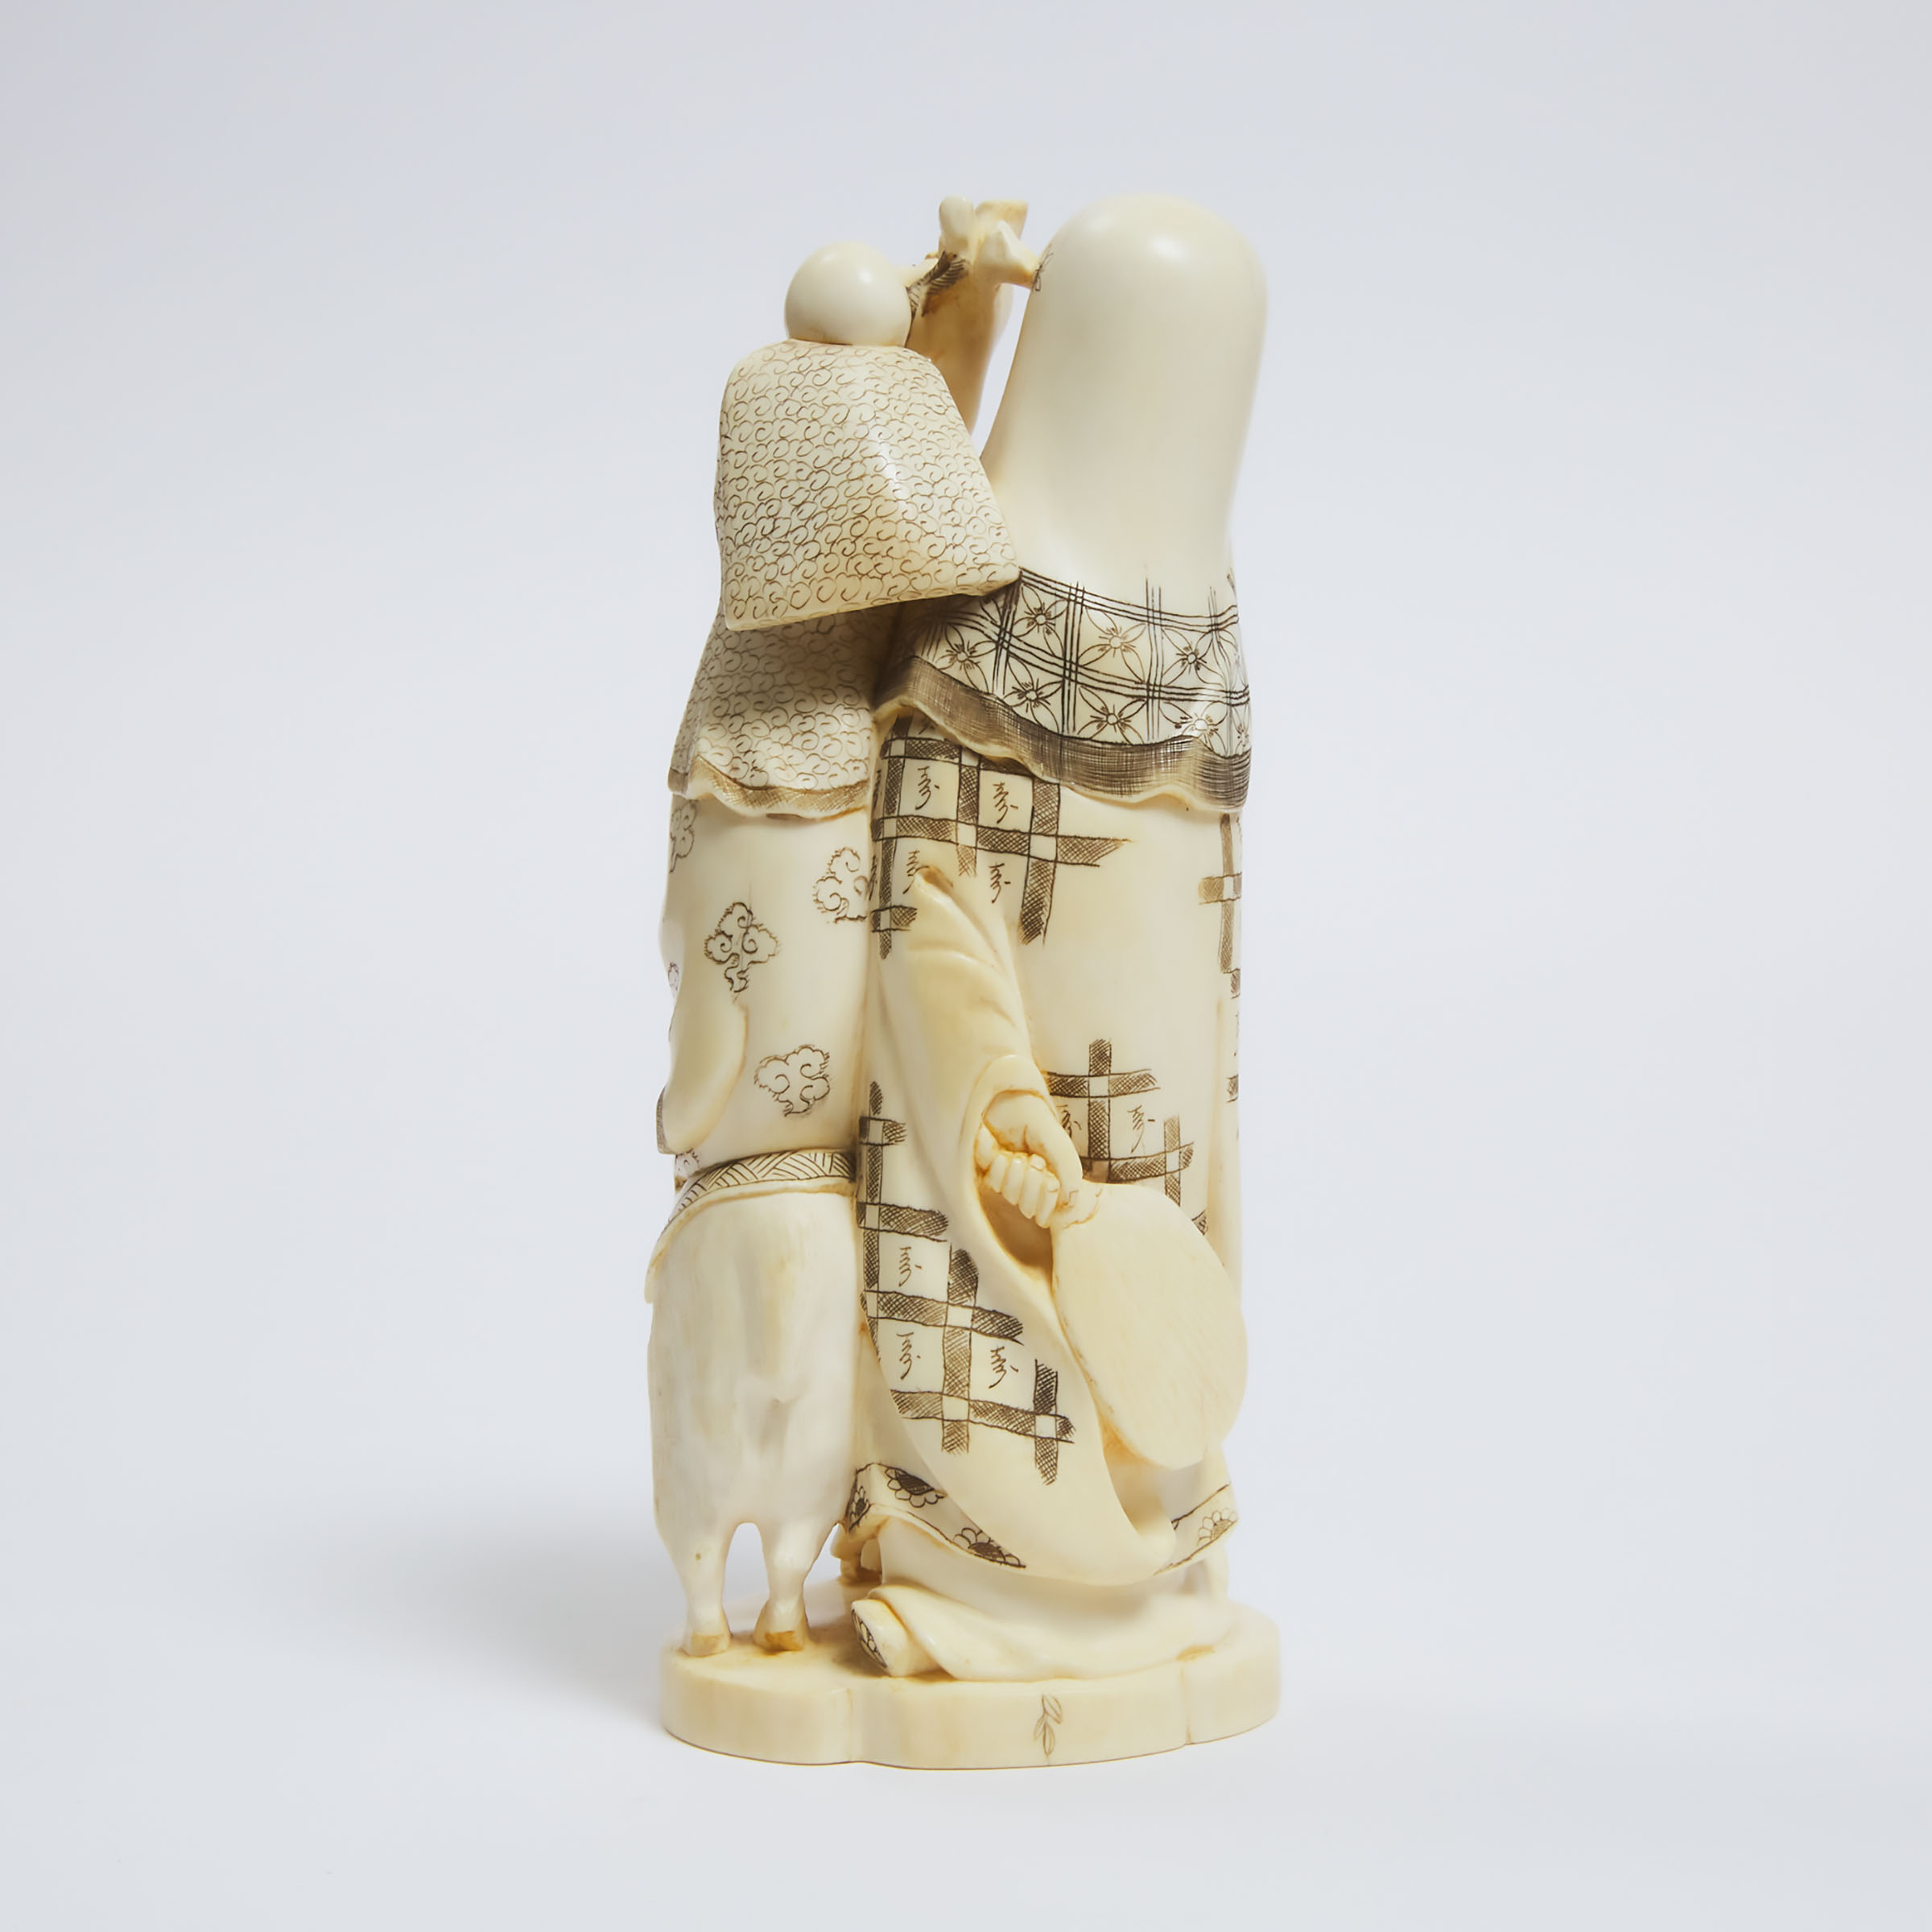 An Ivory Okimono of Two Immortals and a Ram, Early to Mid 20th Century